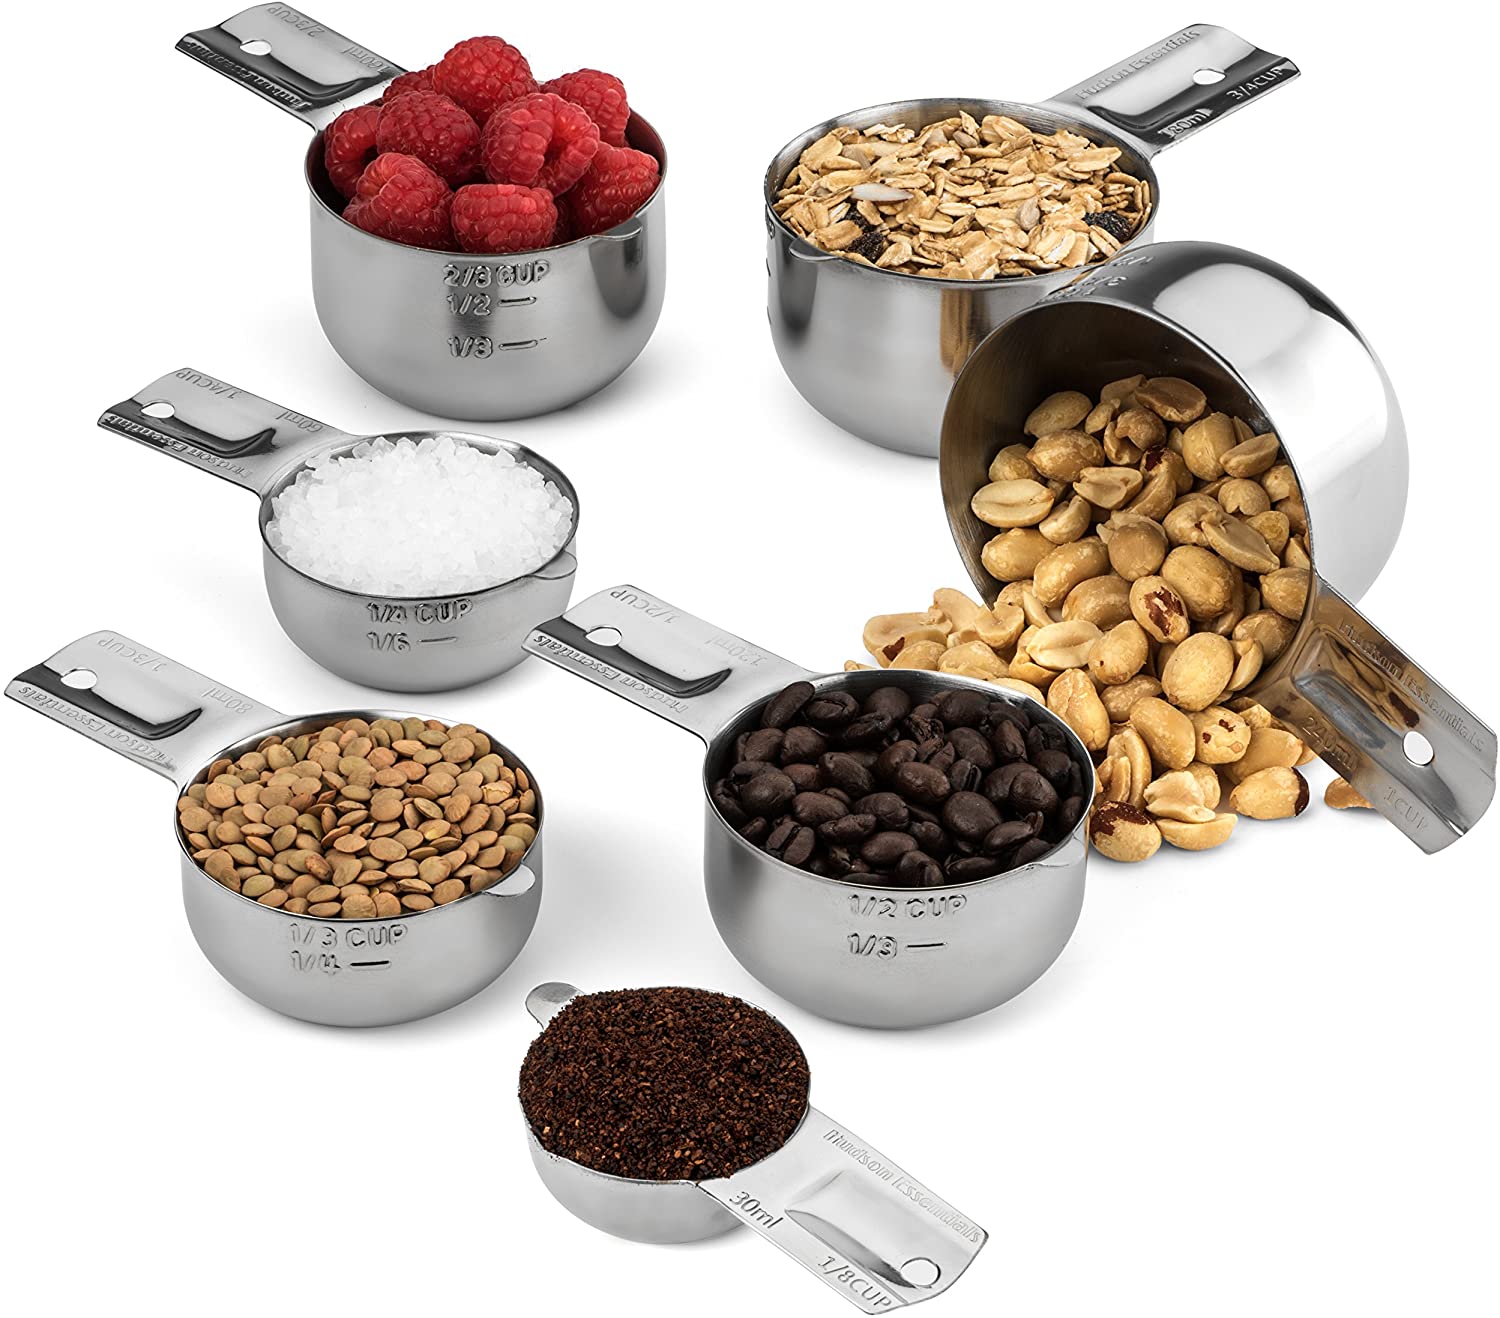 Stainless Steel Measuring Cups and Spoons Set (1 Piece 2-Cup) - Hudson  Essentials